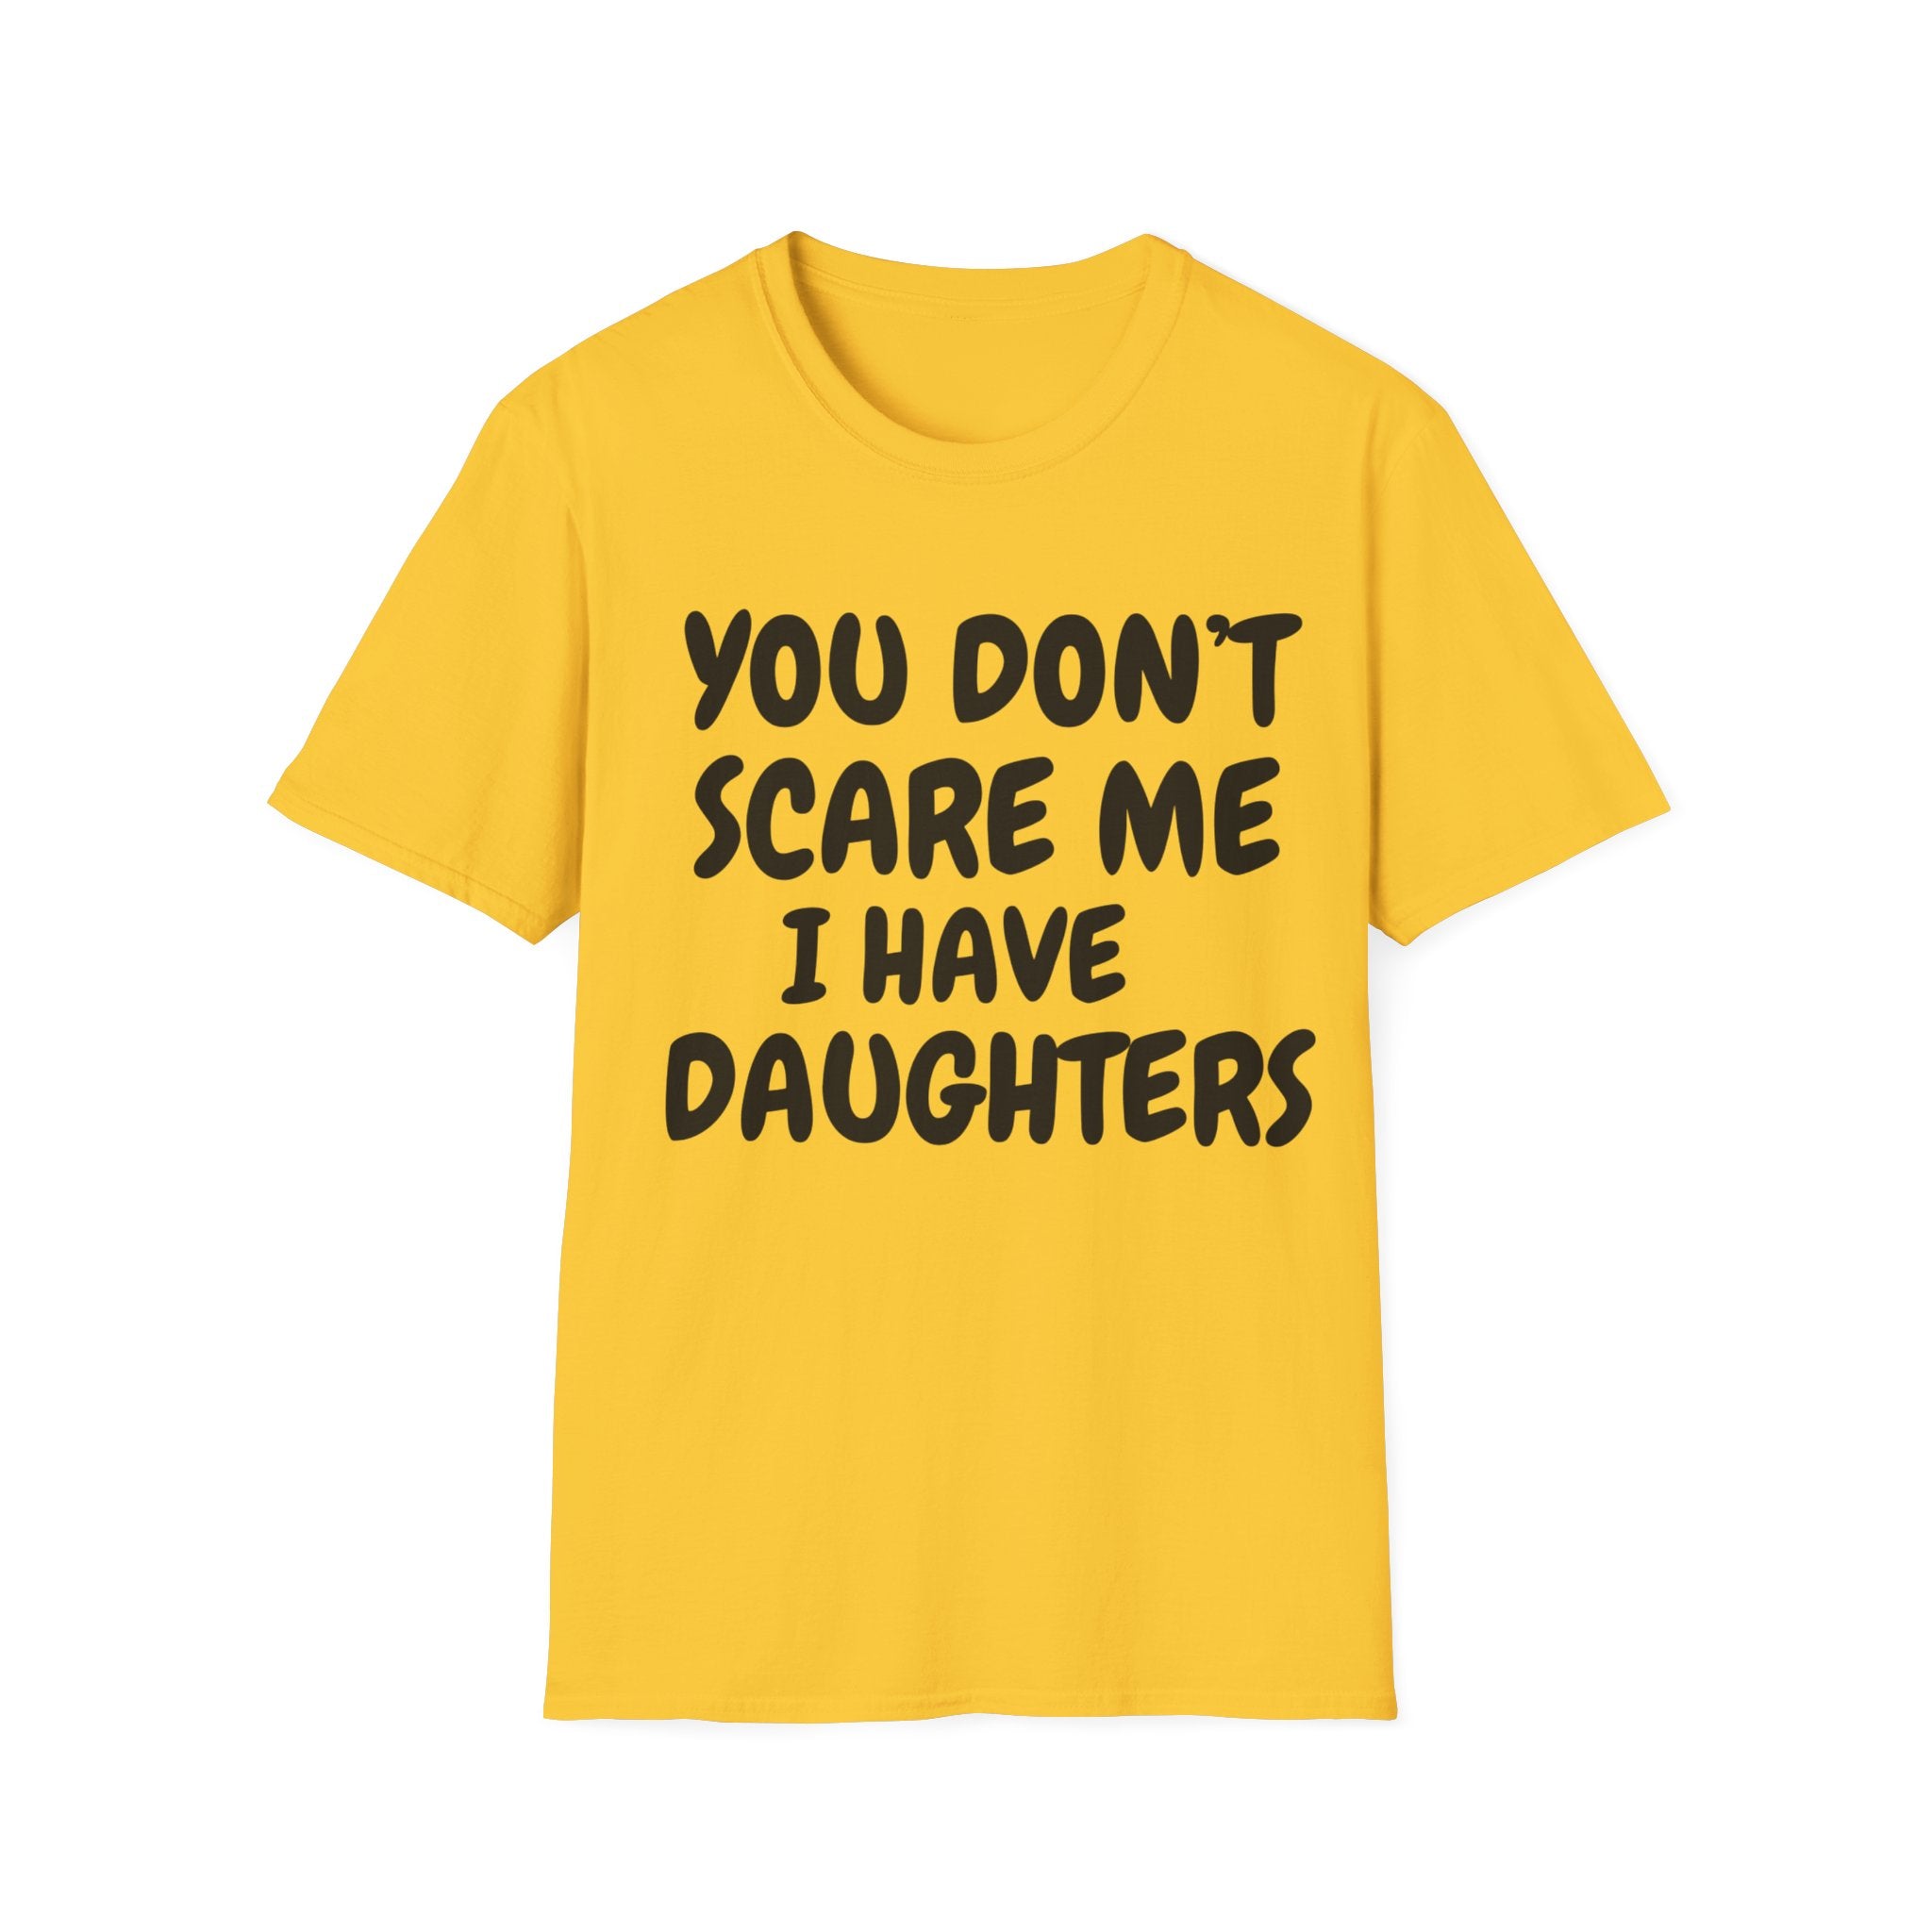 You Don't Scare Me I have Daughters Funny Dad T-shirt, Father's Day Gift, Gift for Dad, Dad Shirt, Men's T-shirt